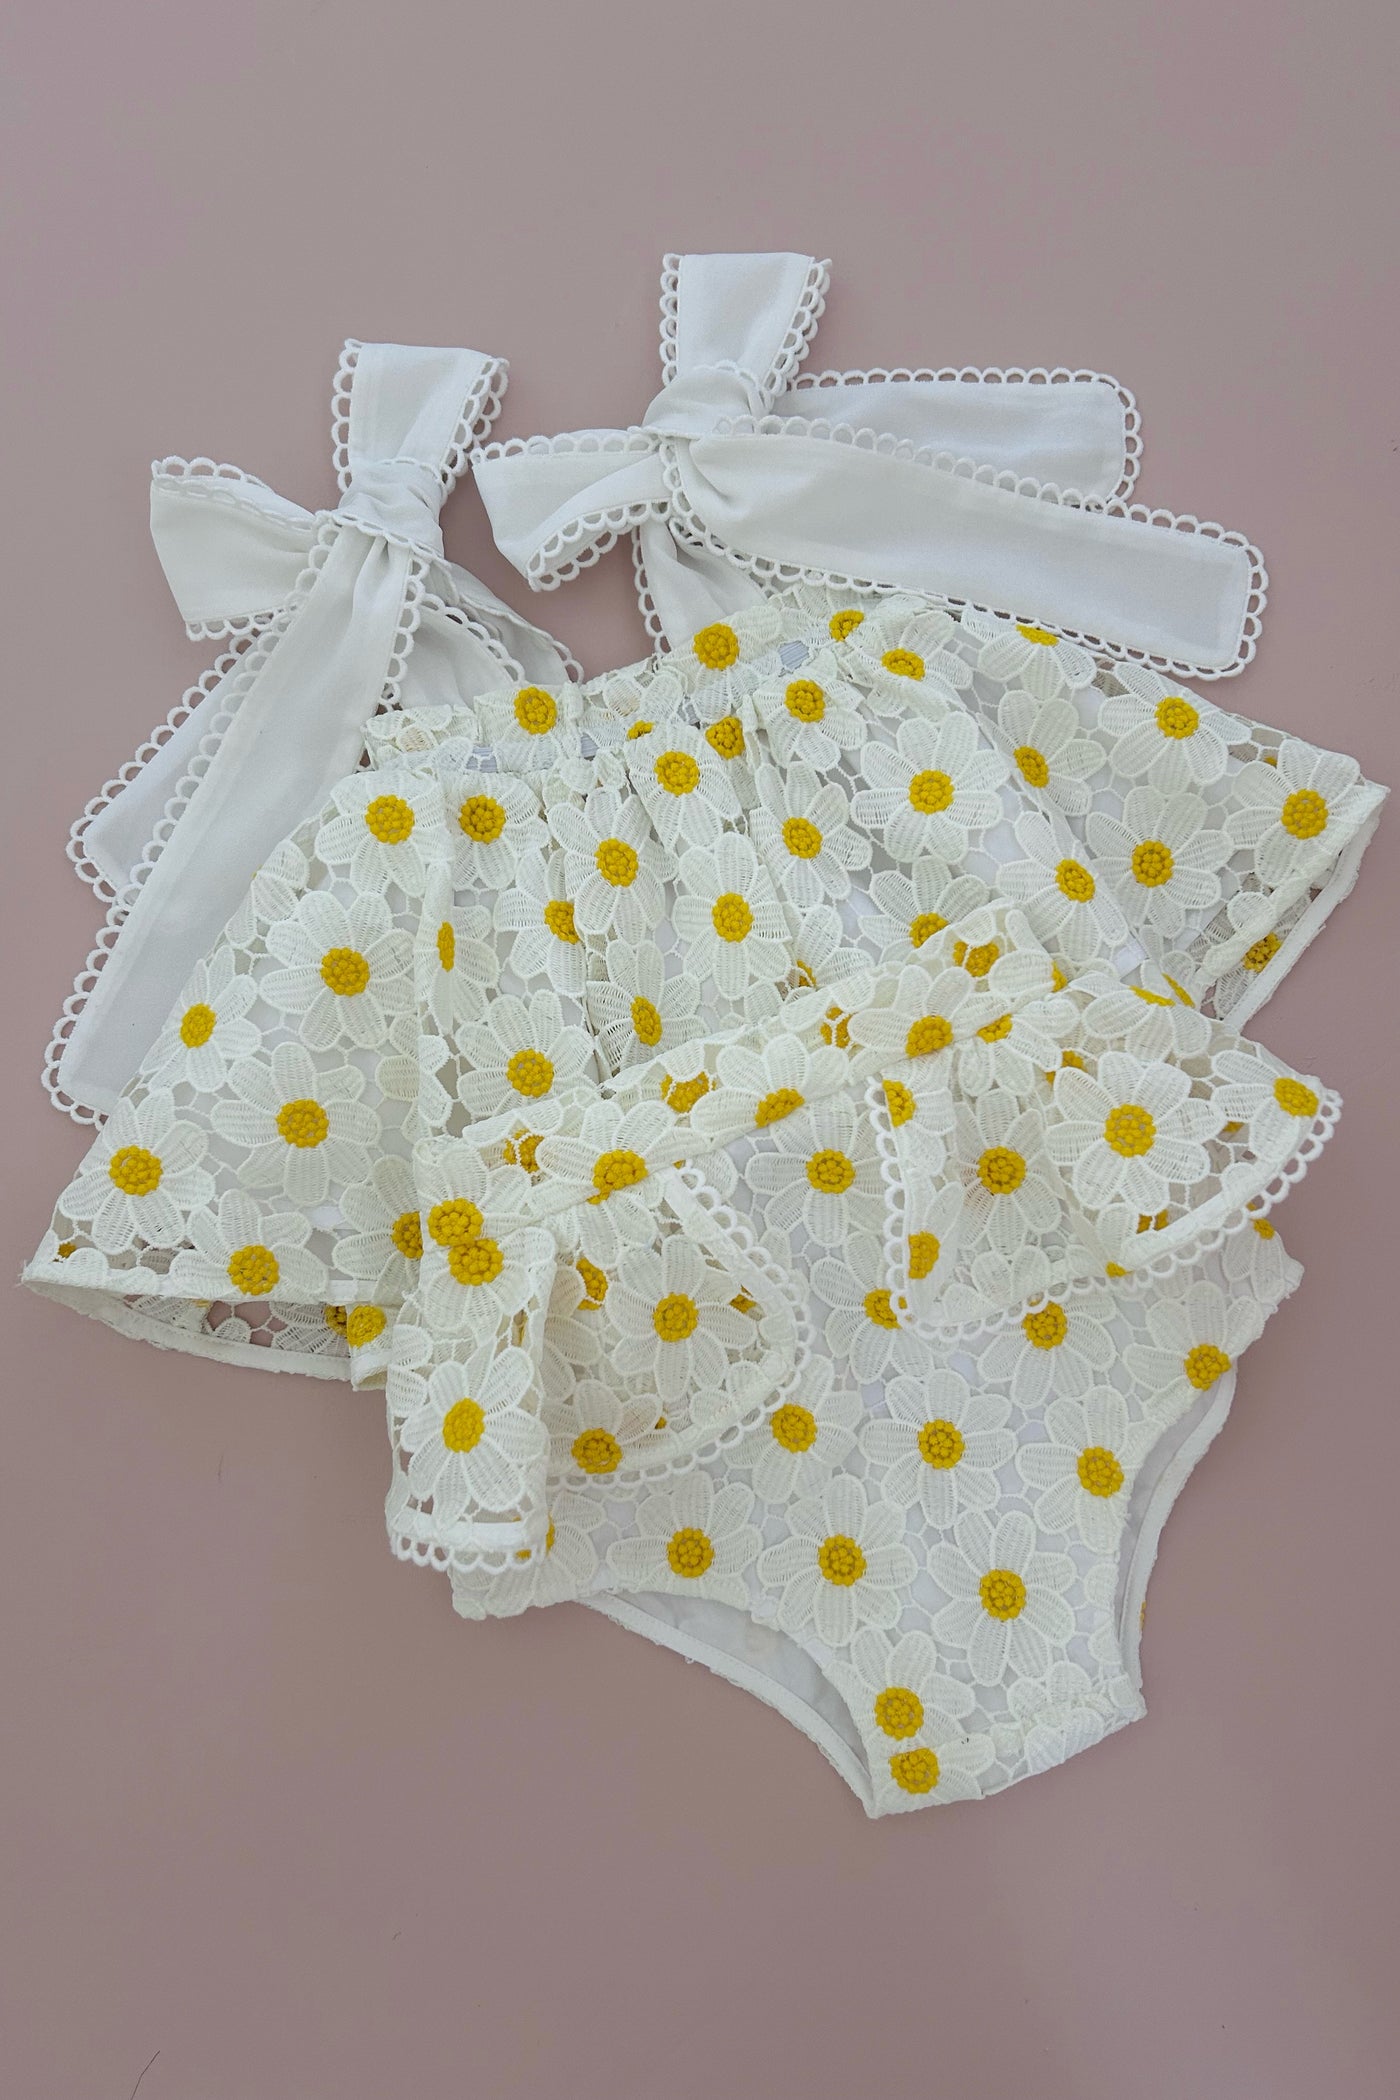 STYLE SET:  One Day Top and Made them Cry Shortie Shorts - Daisy Chains Lace